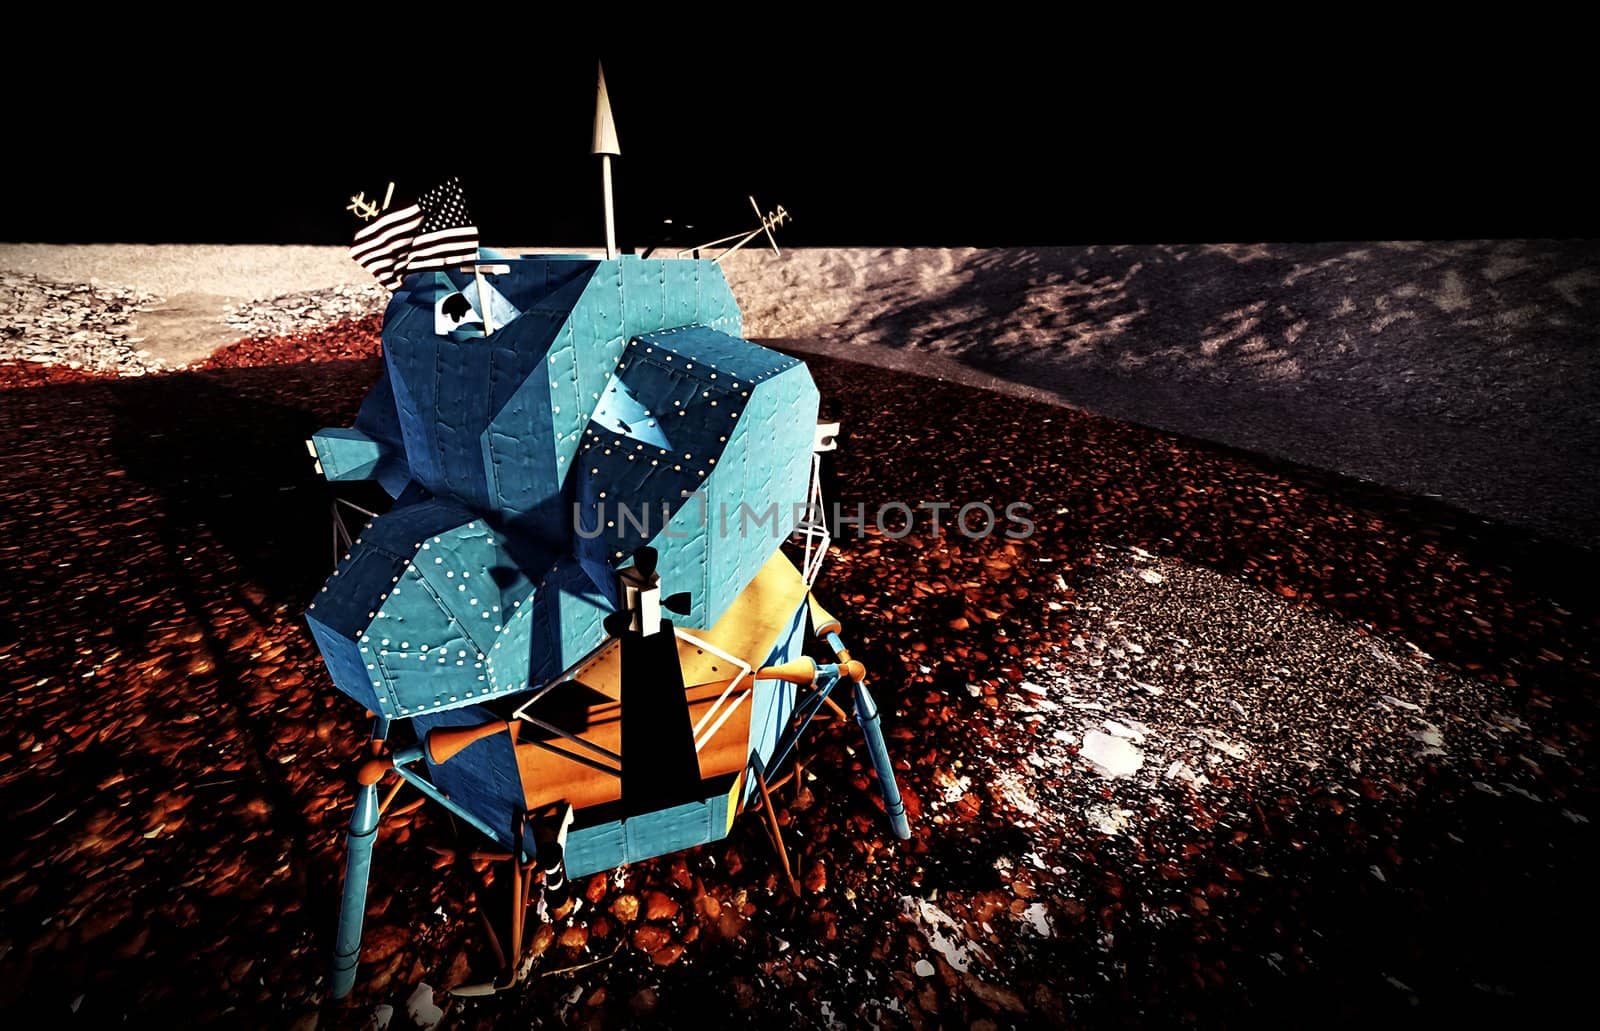 Moon rover on alien planet